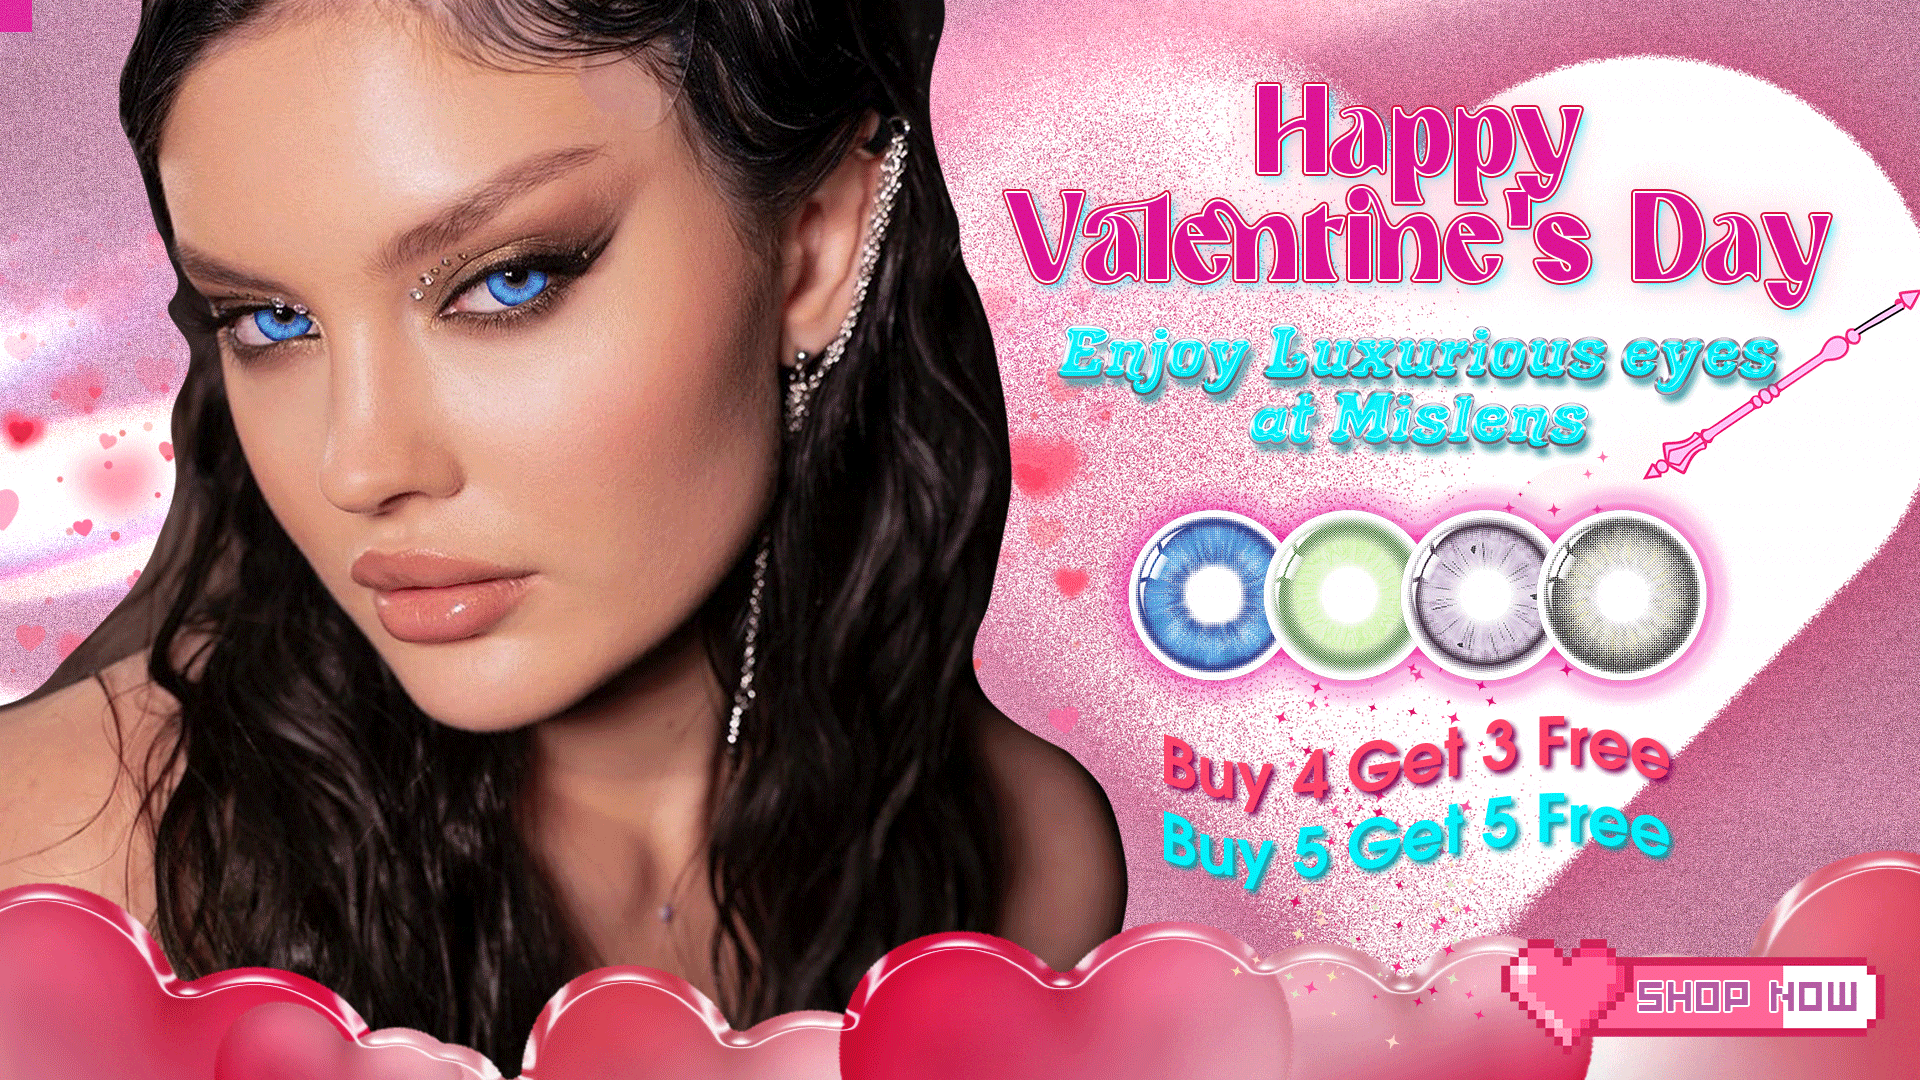 Mislens Contacts valentine's Sales, Better than rose with 50% OFF